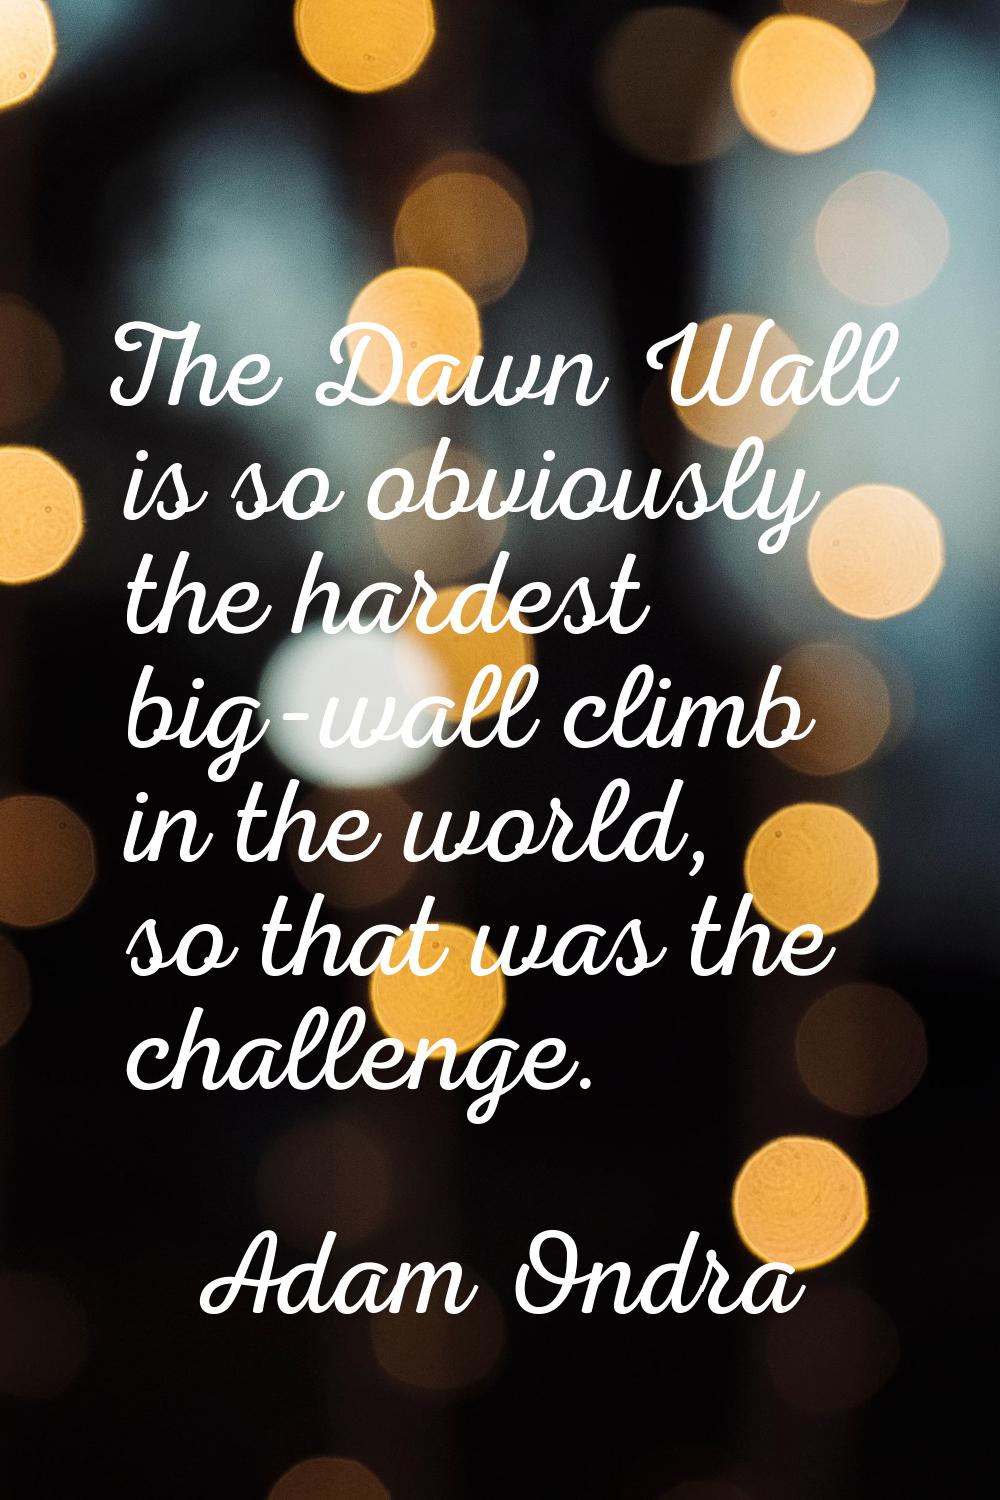 The Dawn Wall is so obviously the hardest big-wall climb in the world, so that was the challenge.